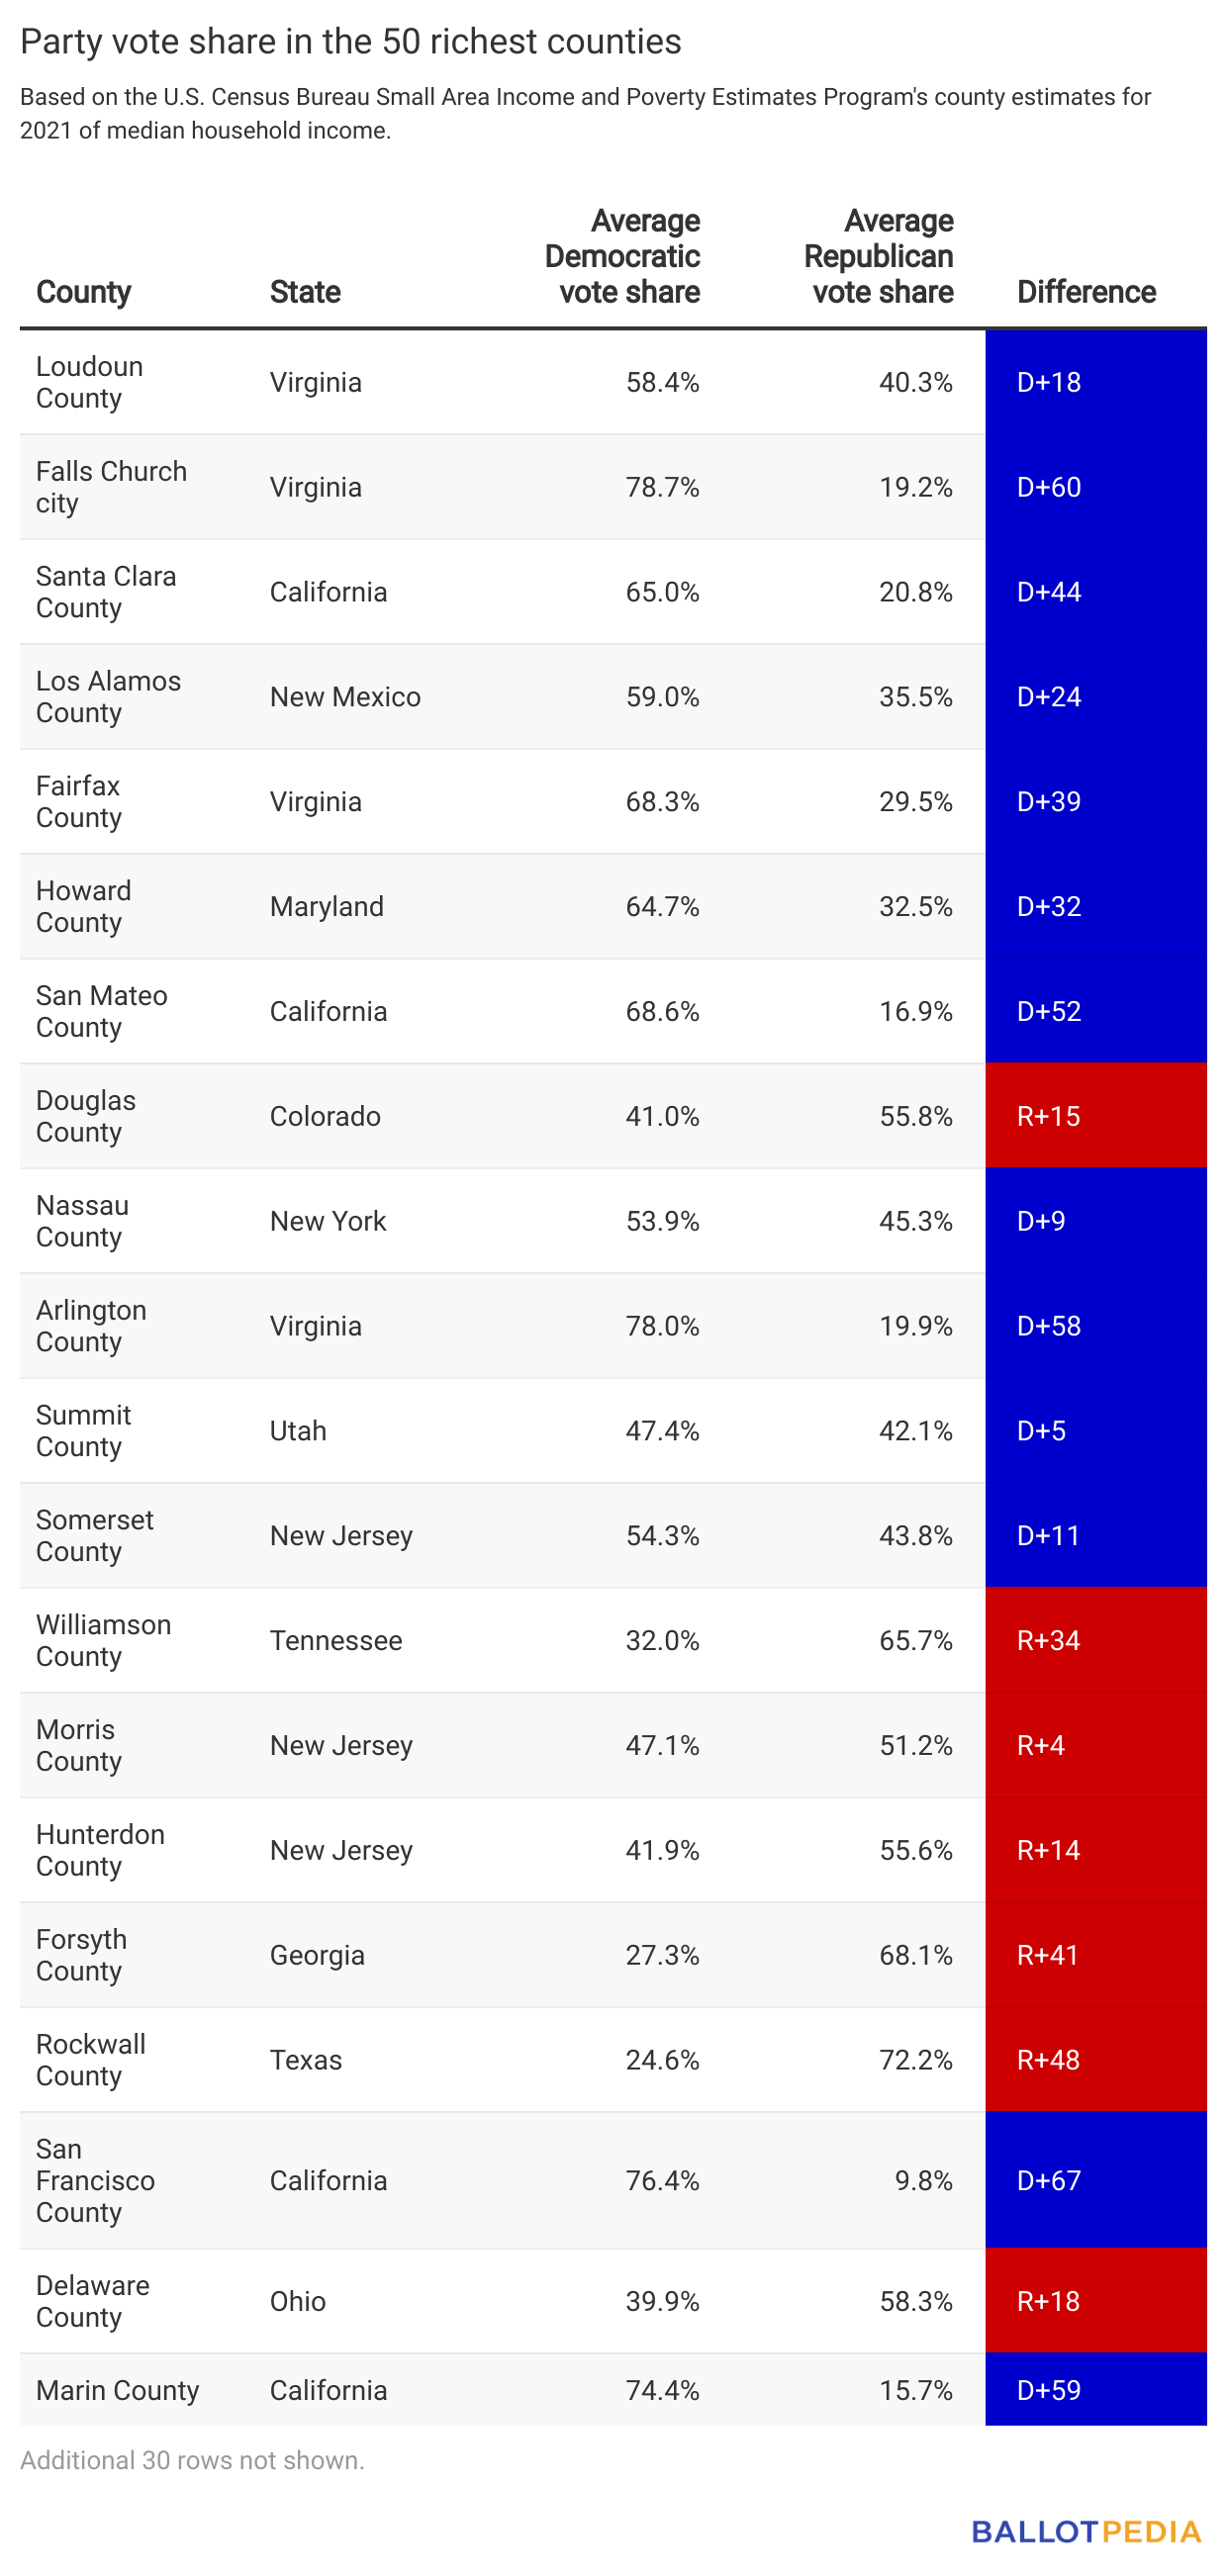 Table showing party vote share in the 50 richest counties.